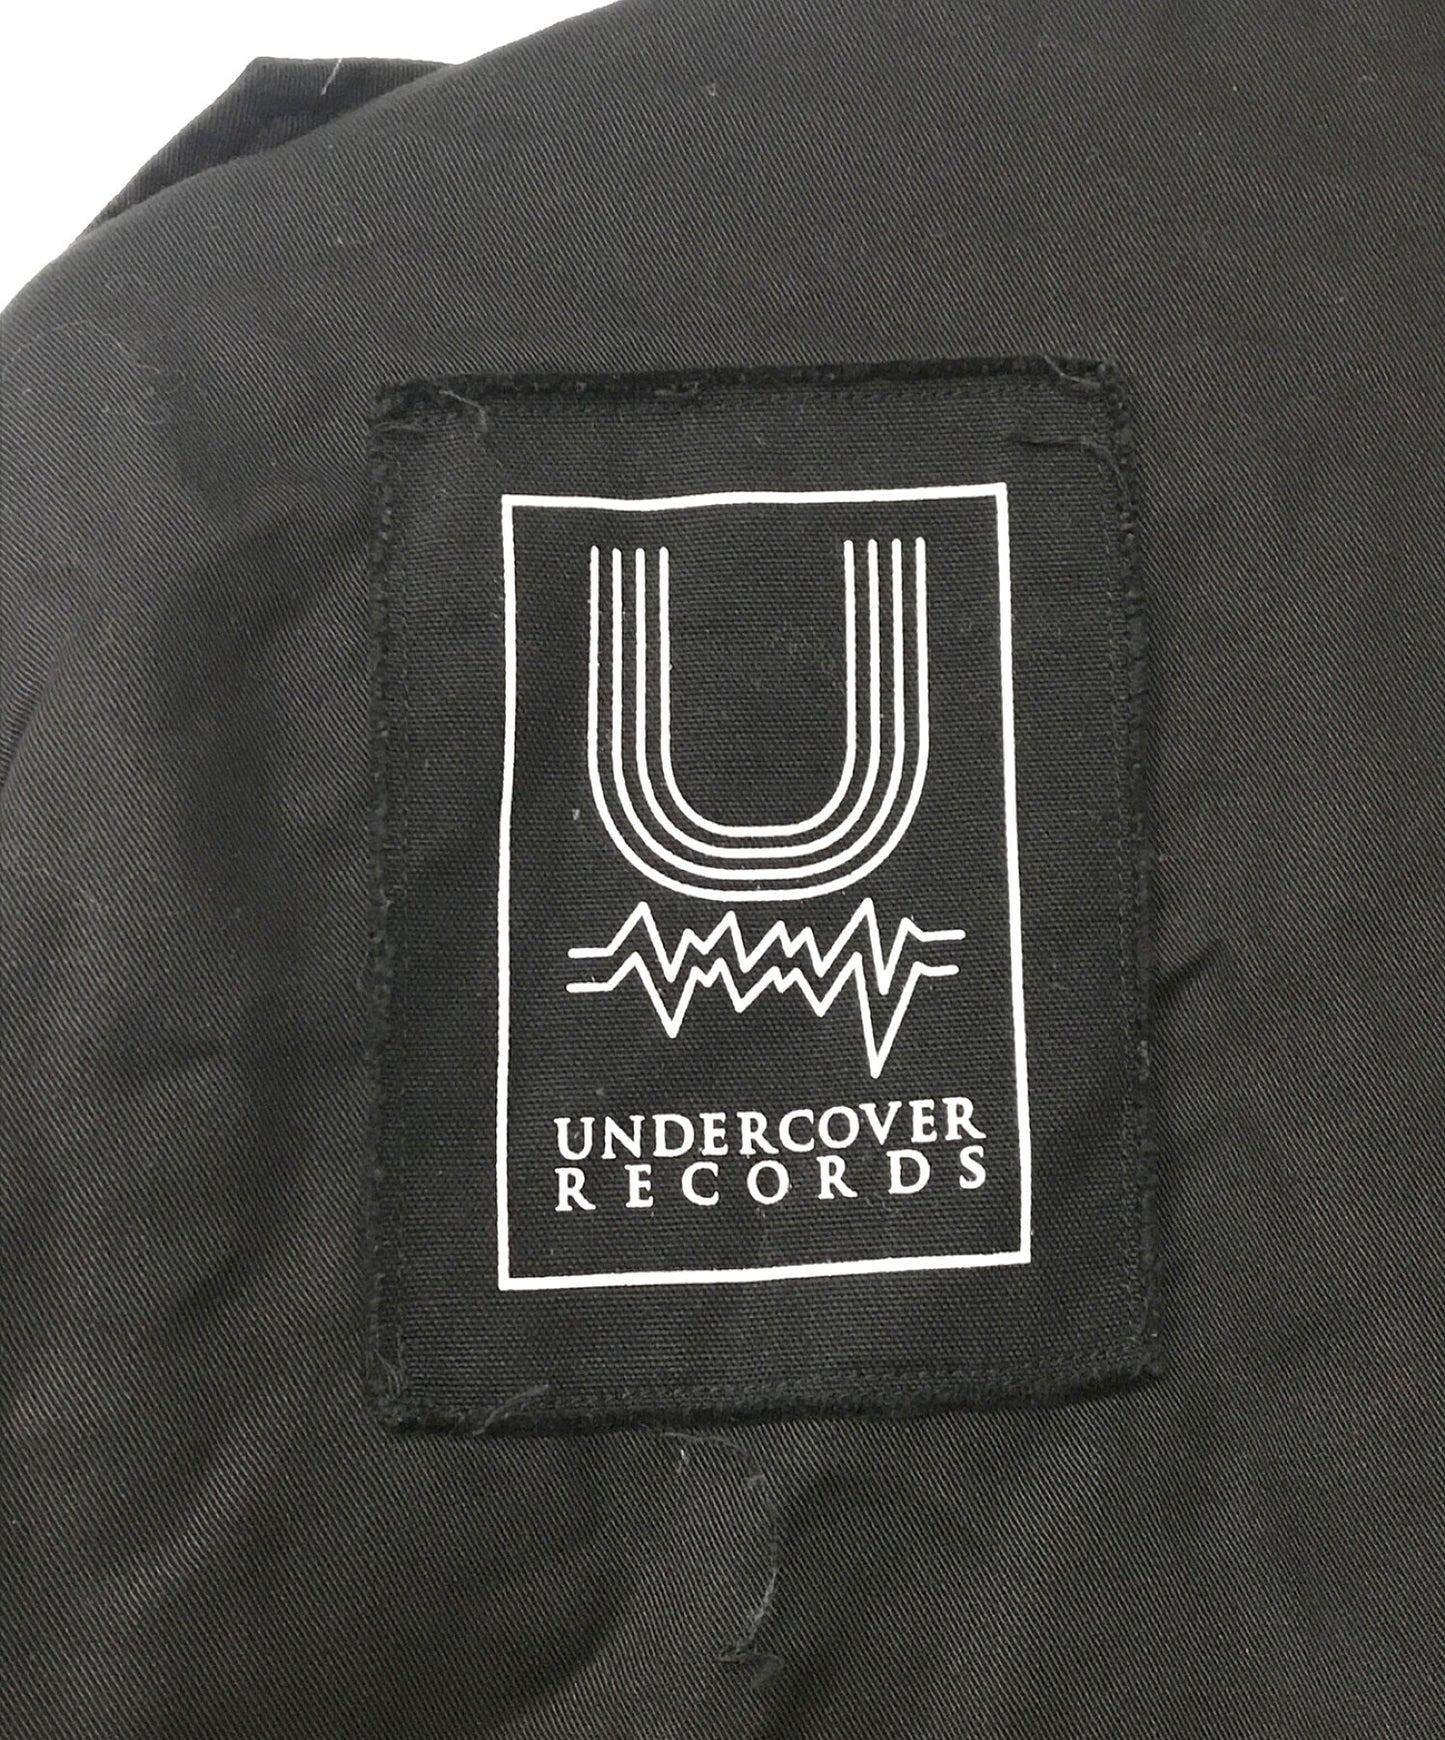 [Pre-owned] UNDERCOVER custom army shirt jacket UCY9403